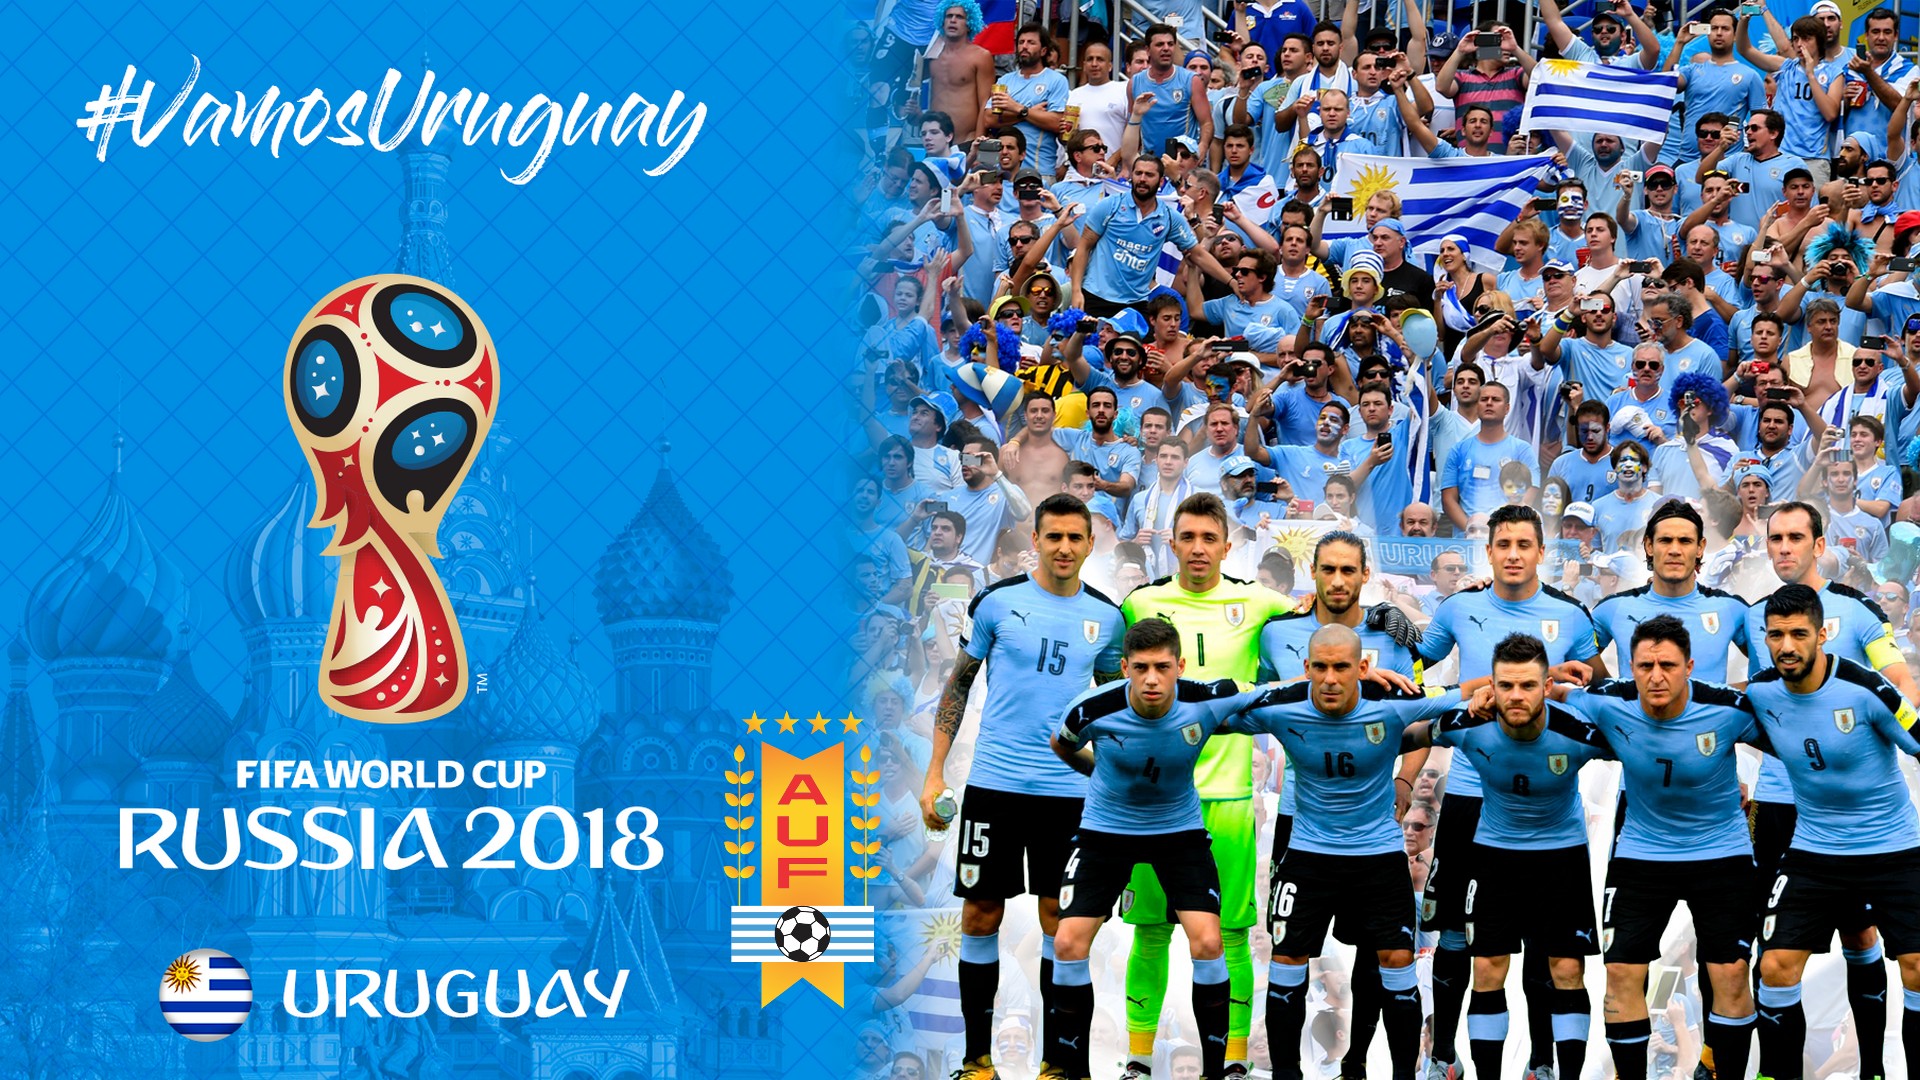 Wallpaper Desktop Uruguay National Team HD with resolution 1920x1080 pixel. You can make this wallpaper for your Mac or Windows Desktop Background, iPhone, Android or Tablet and another Smartphone device